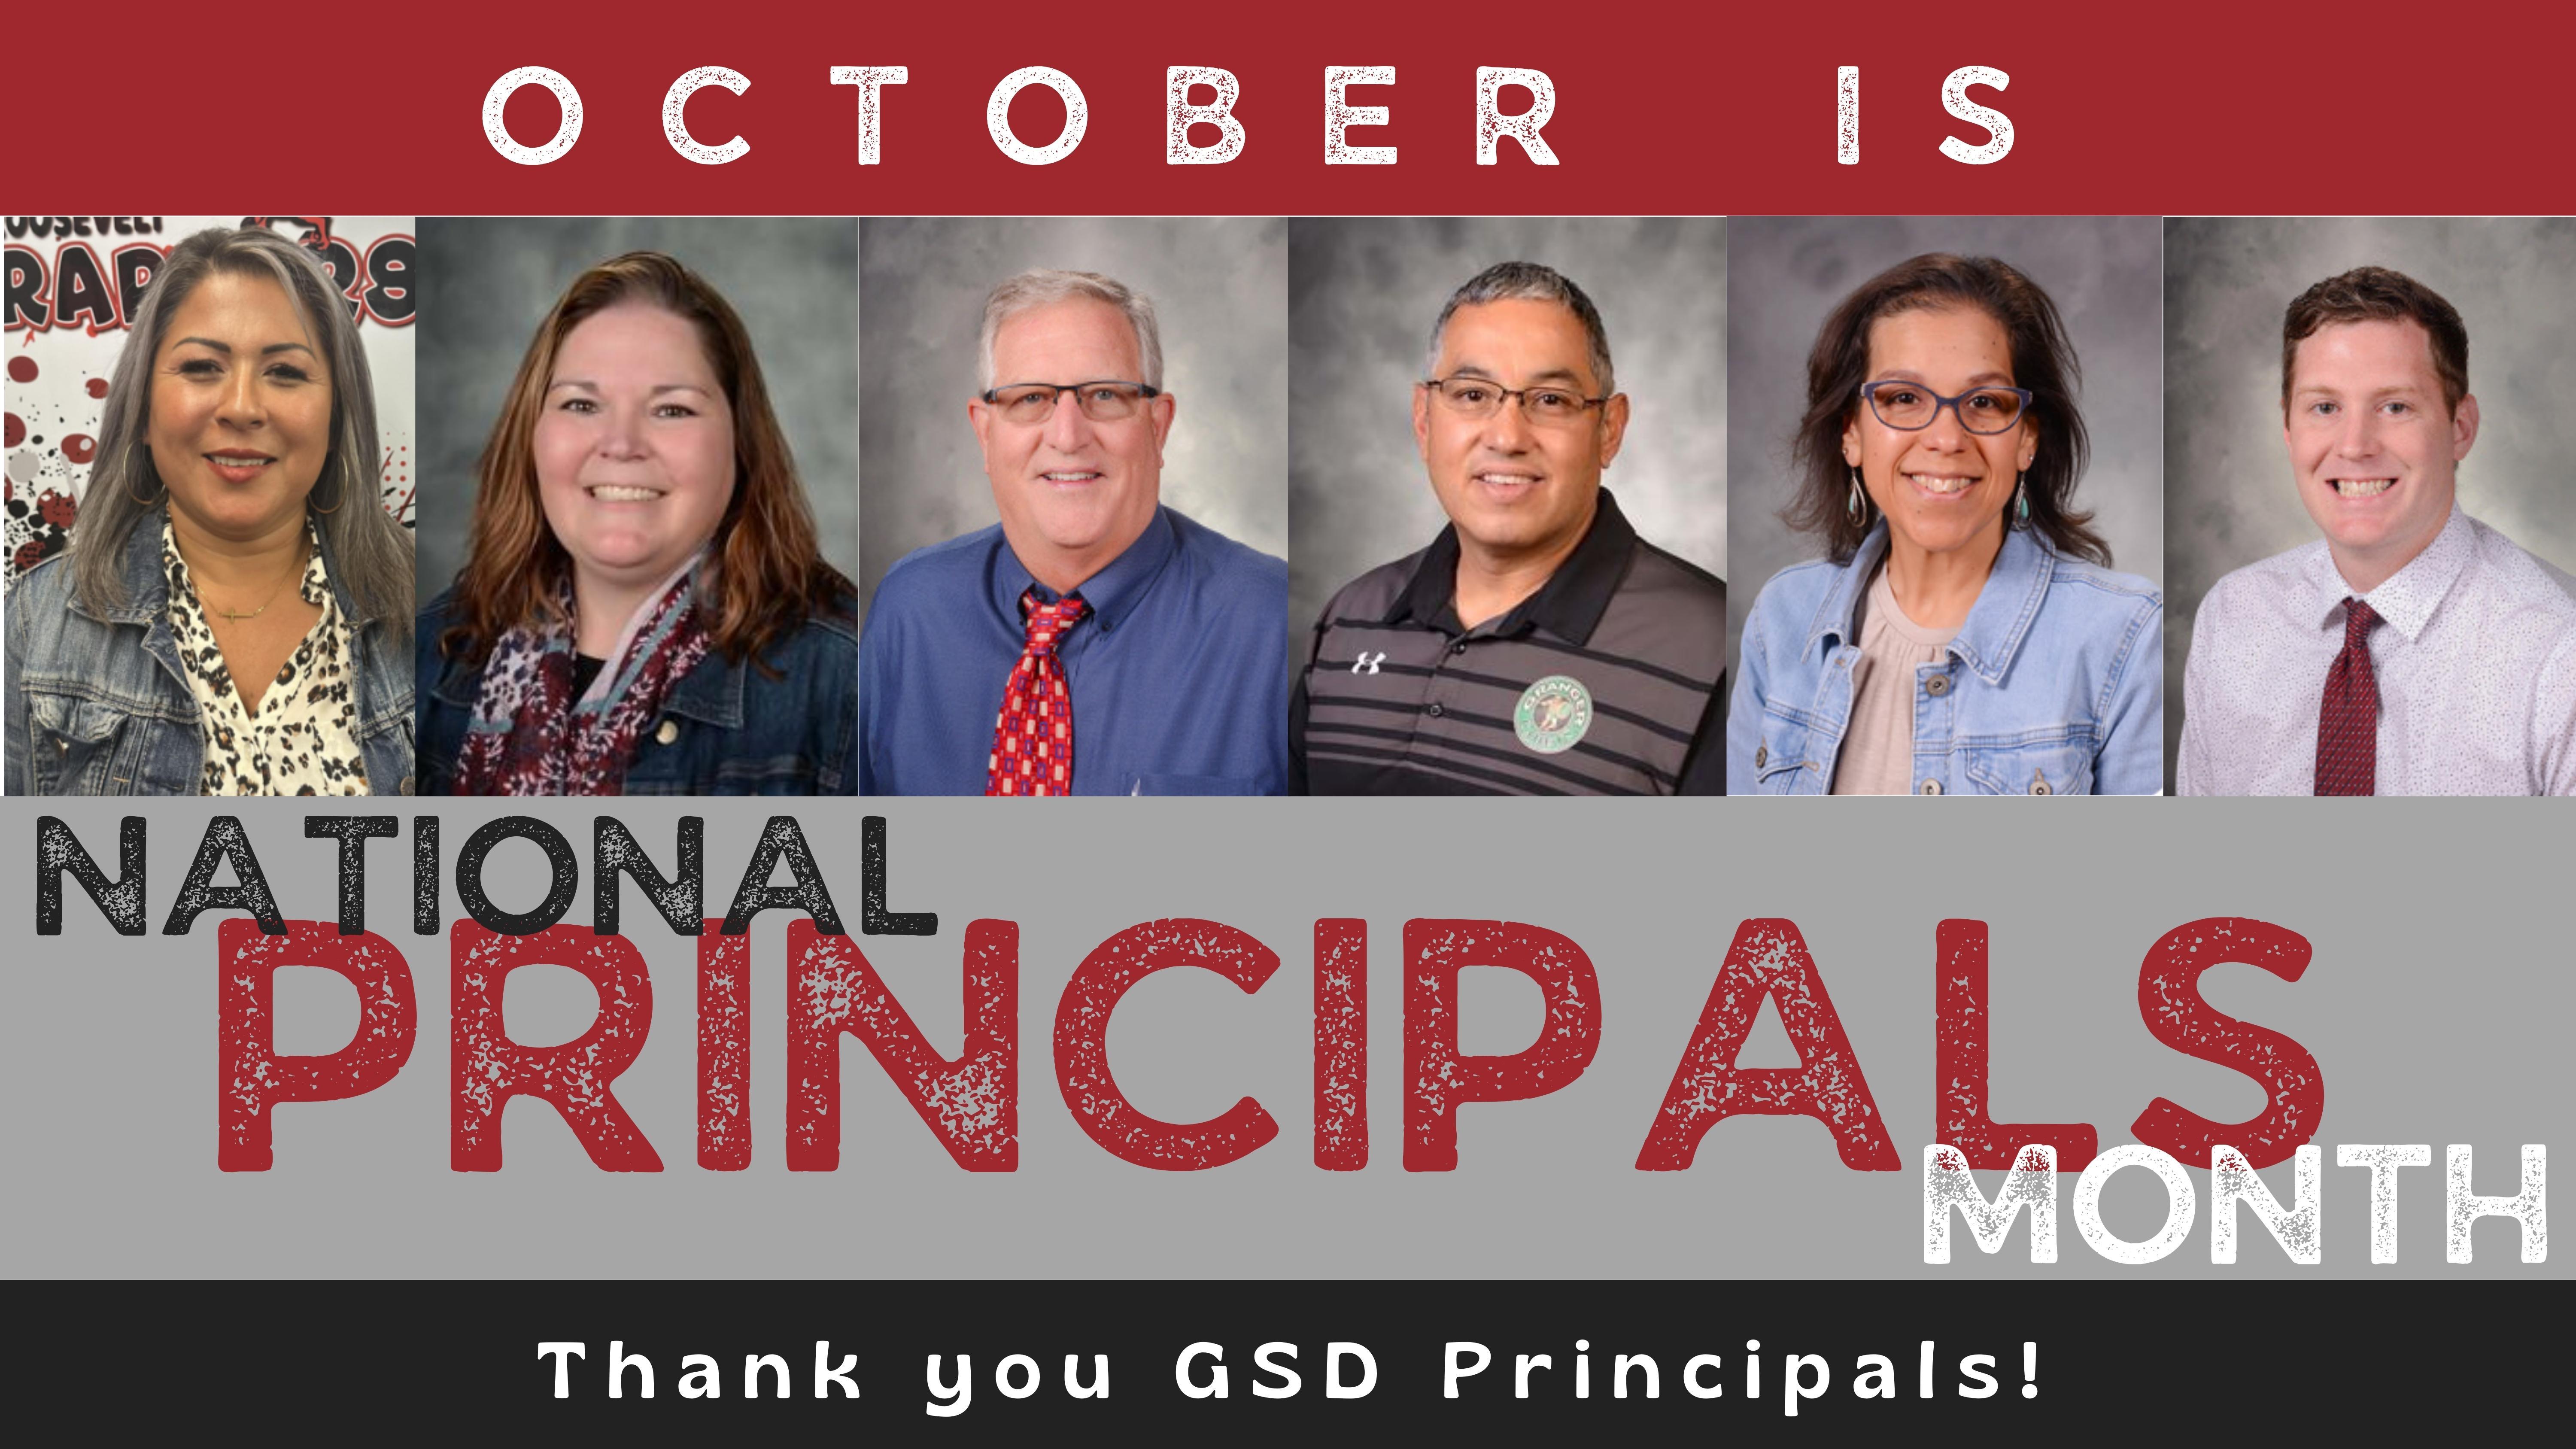 national principals month is october